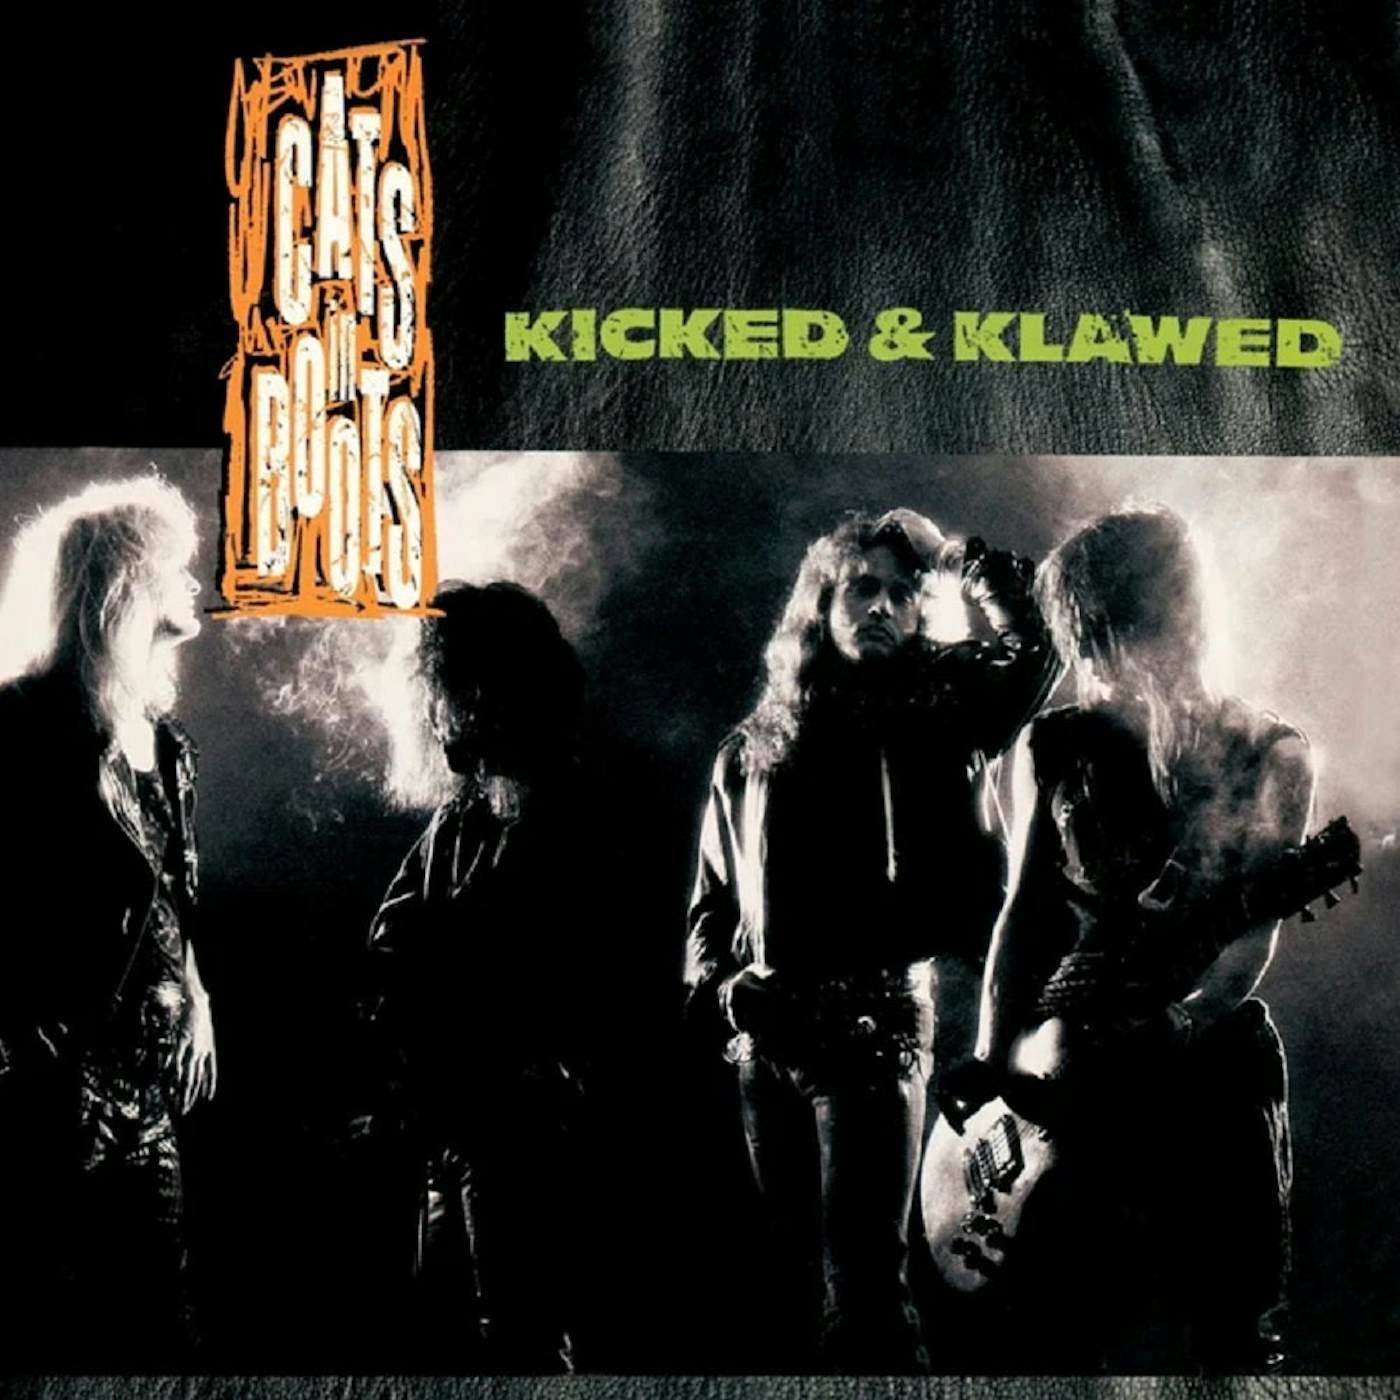 Cats In Boots "Kicked & Klawed (Reissue)" CD